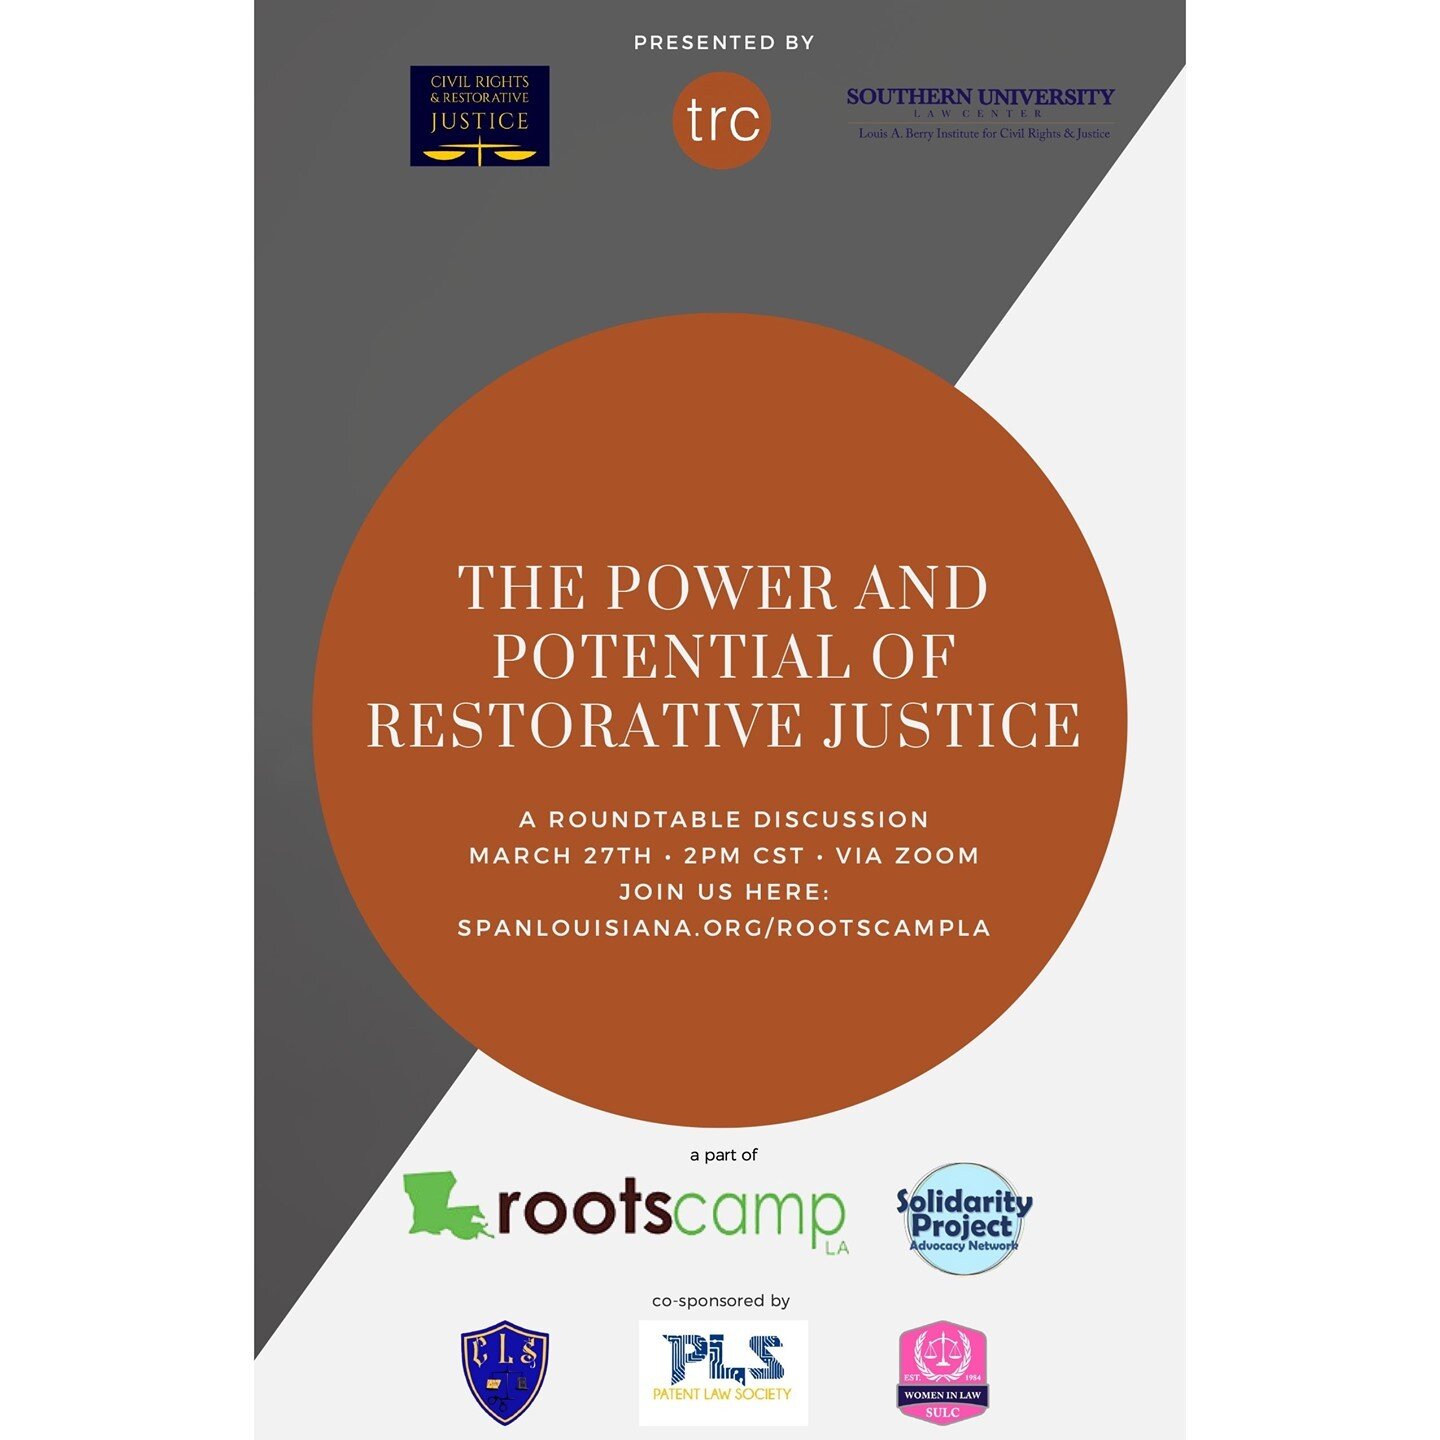 Join TRC Founder Shailly Agnihotri on March 27 for a roundtable discussion on the power and potential of restorative justice as part of RootsCamp LA 2021, the convening of over 150 forward thinking activists across the state of Louisiana.⁠
⁠
Link in 